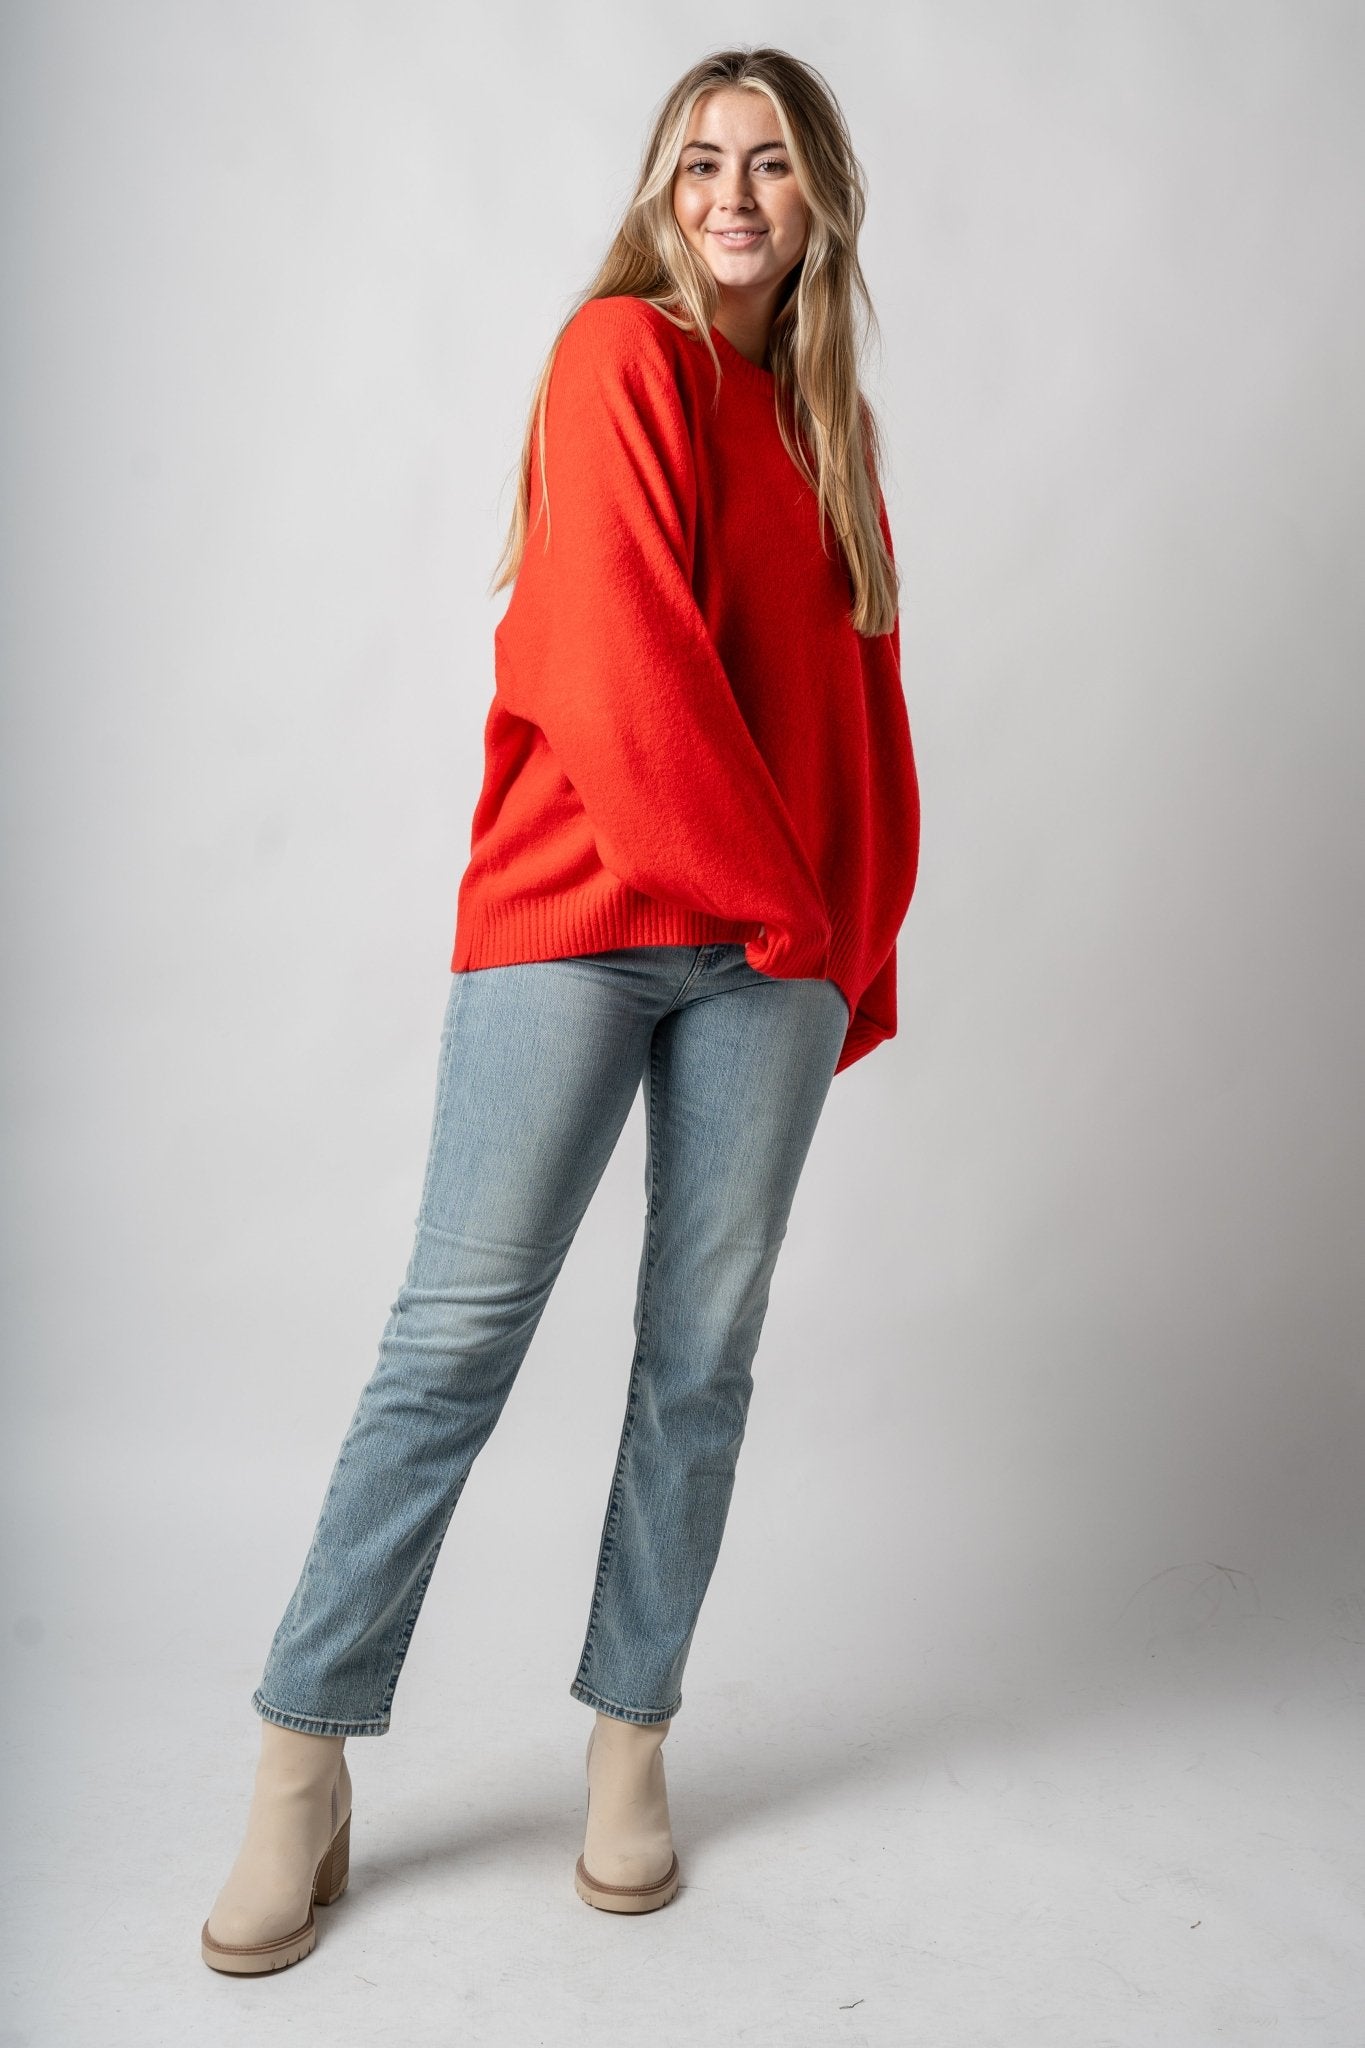 Oversized crew sweater red – Unique Sweaters | Lounging Sweaters and Womens Fashion Sweaters at Lush Fashion Lounge Boutique in Oklahoma City